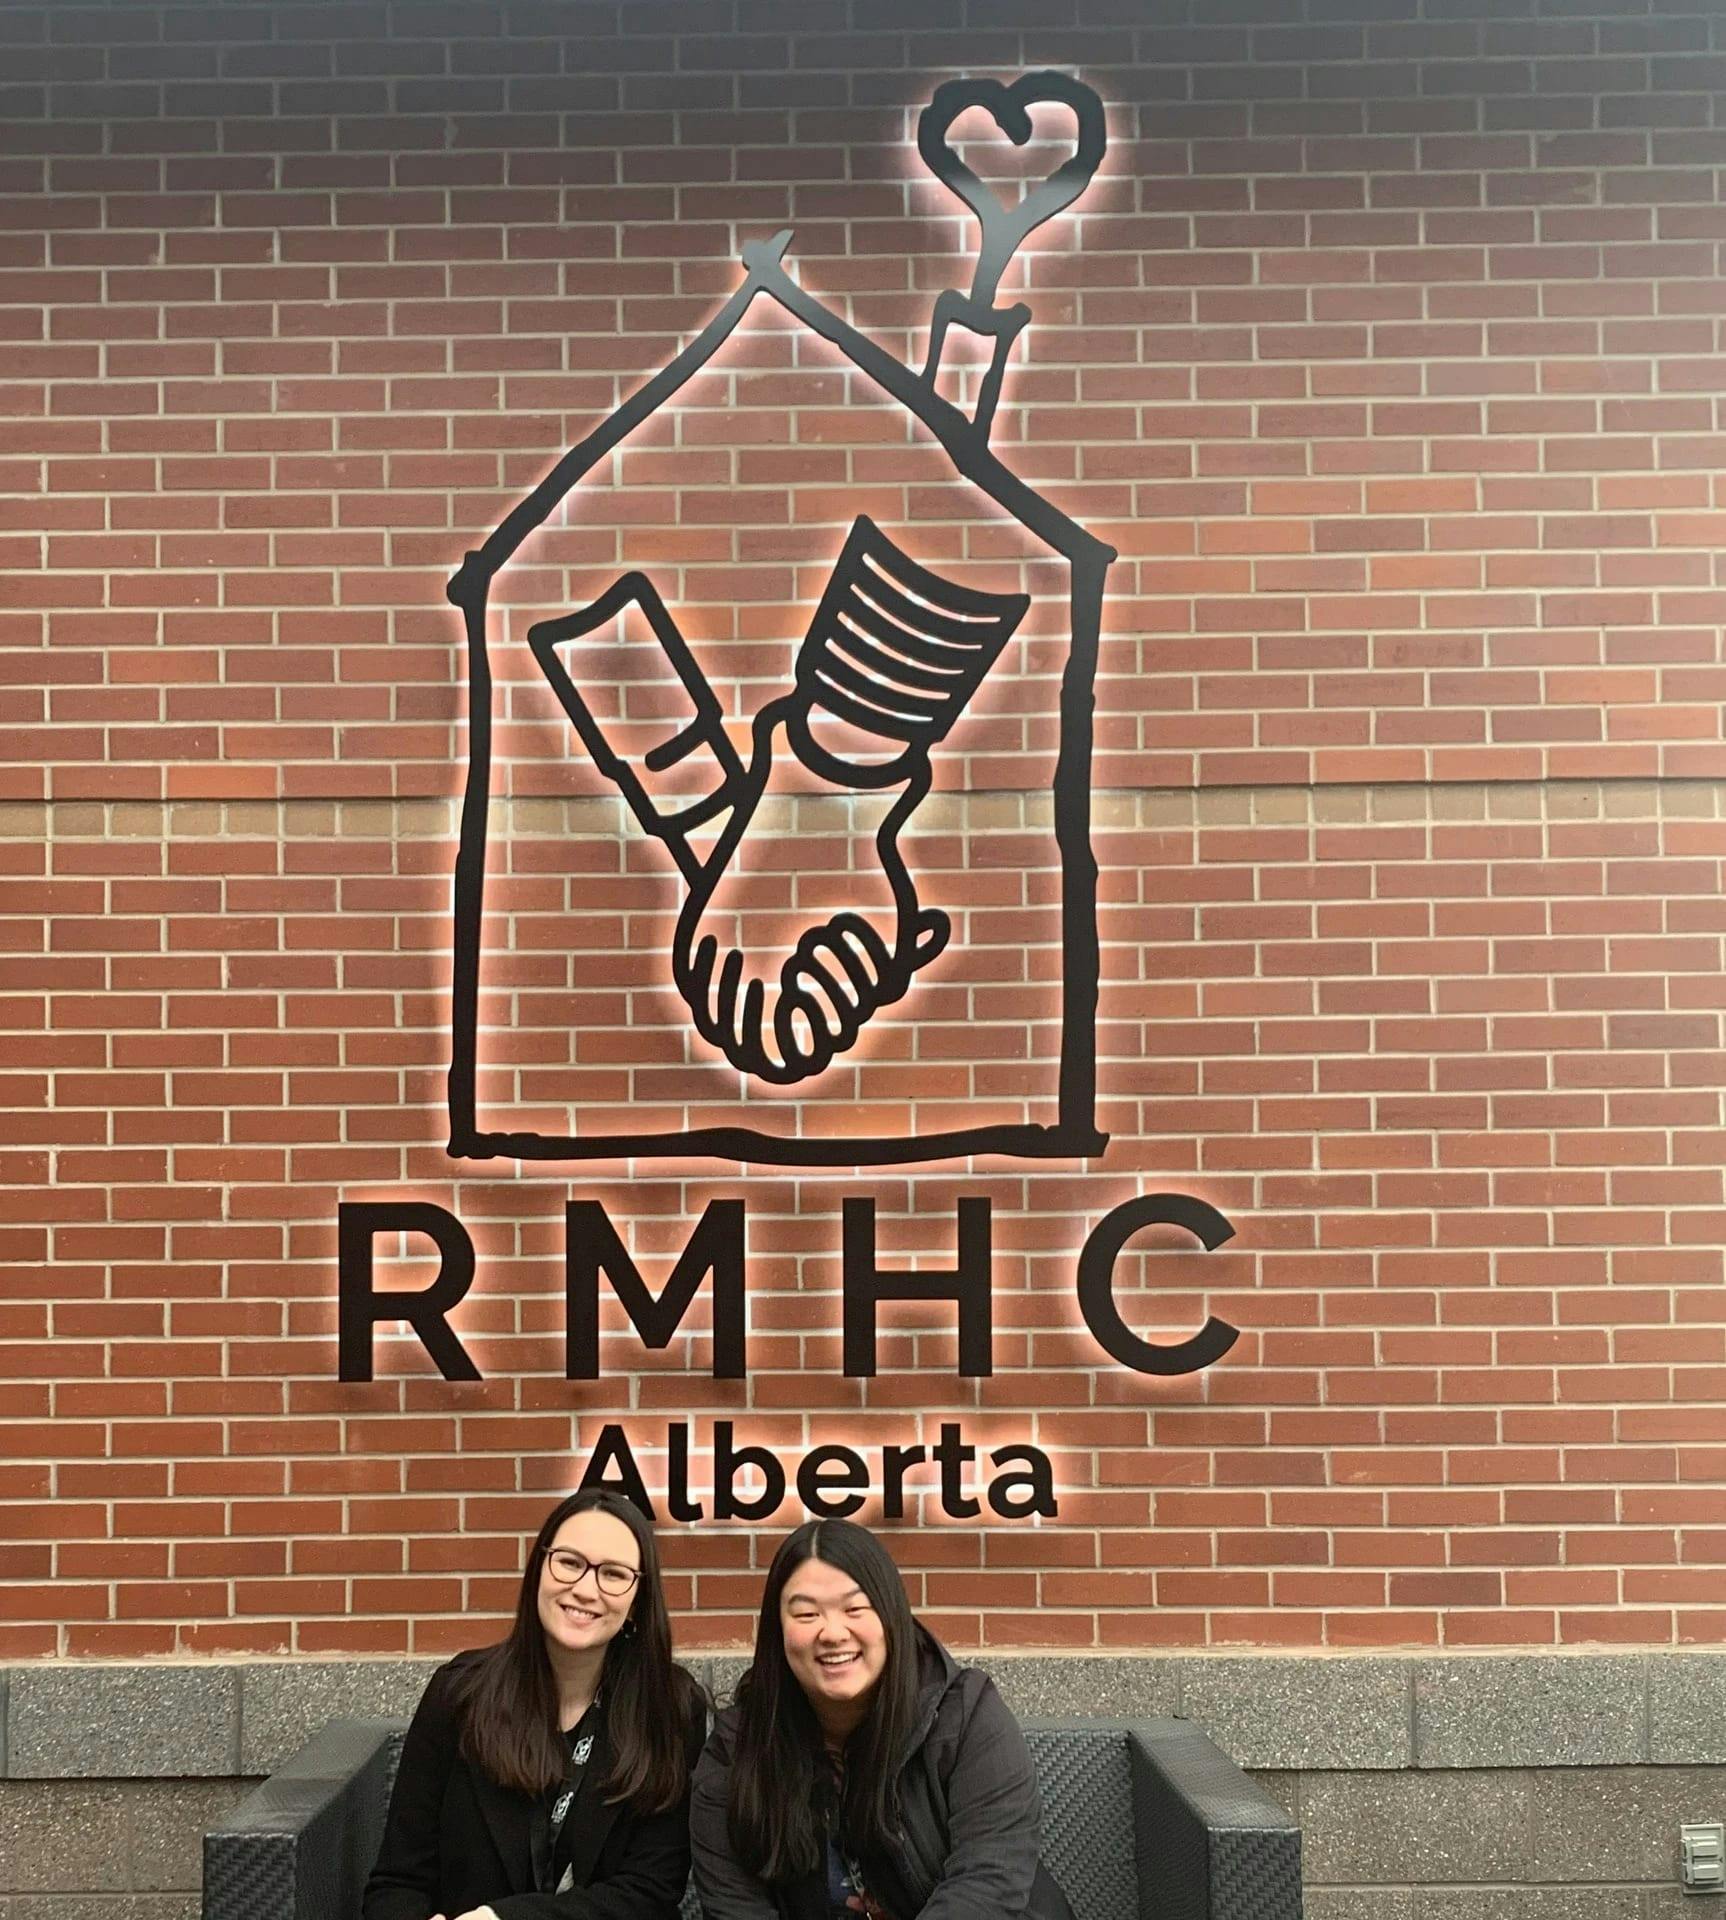 CCC team members Hayley and Jacquie outside the RMHC sign